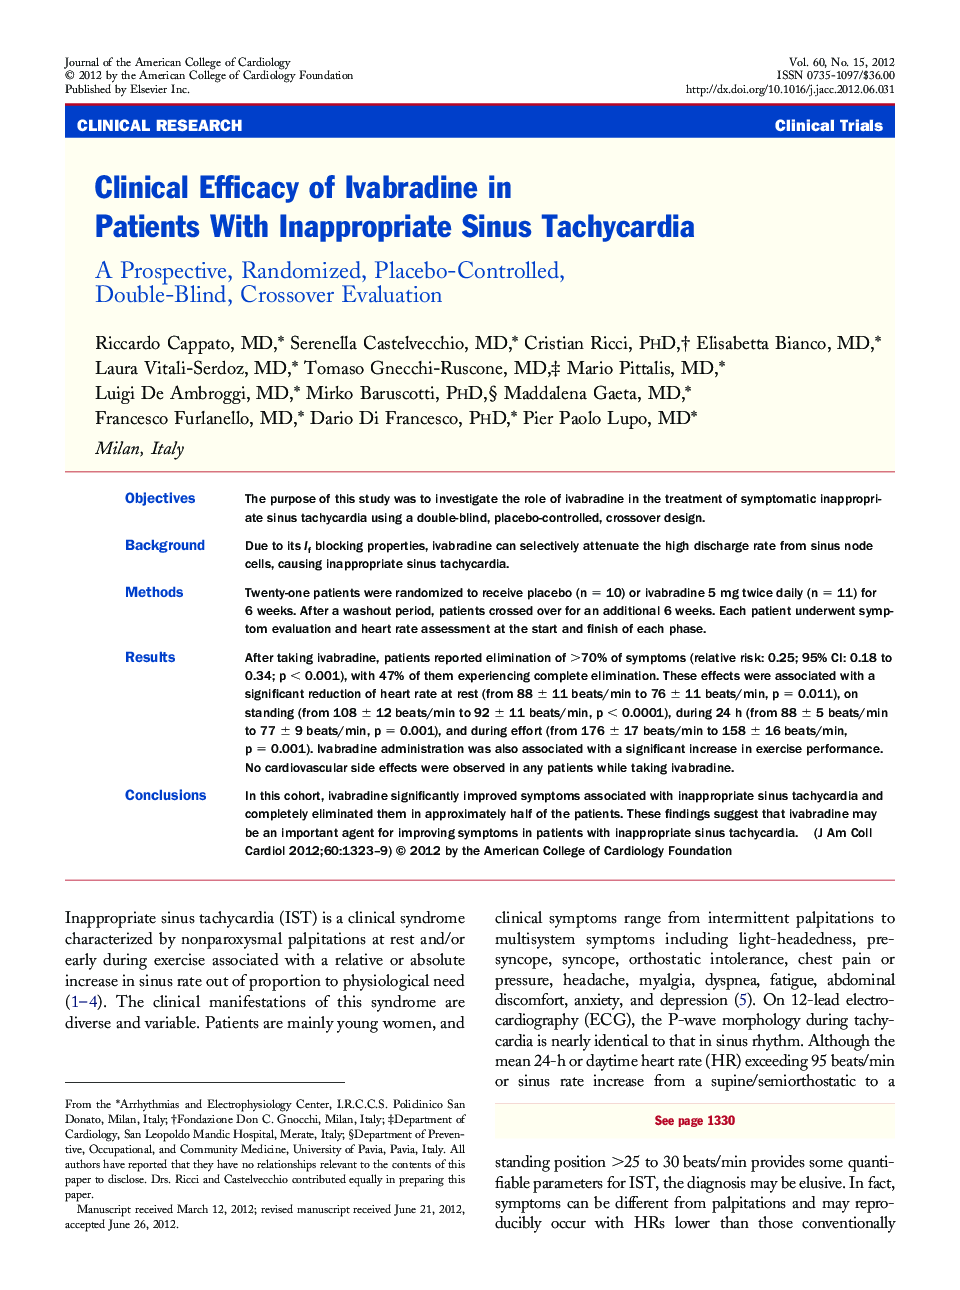 Clinical Efficacy of Ivabradine in Patients With Inappropriate Sinus Tachycardia : A Prospective, Randomized, Placebo-Controlled, Double-Blind, Crossover Evaluation